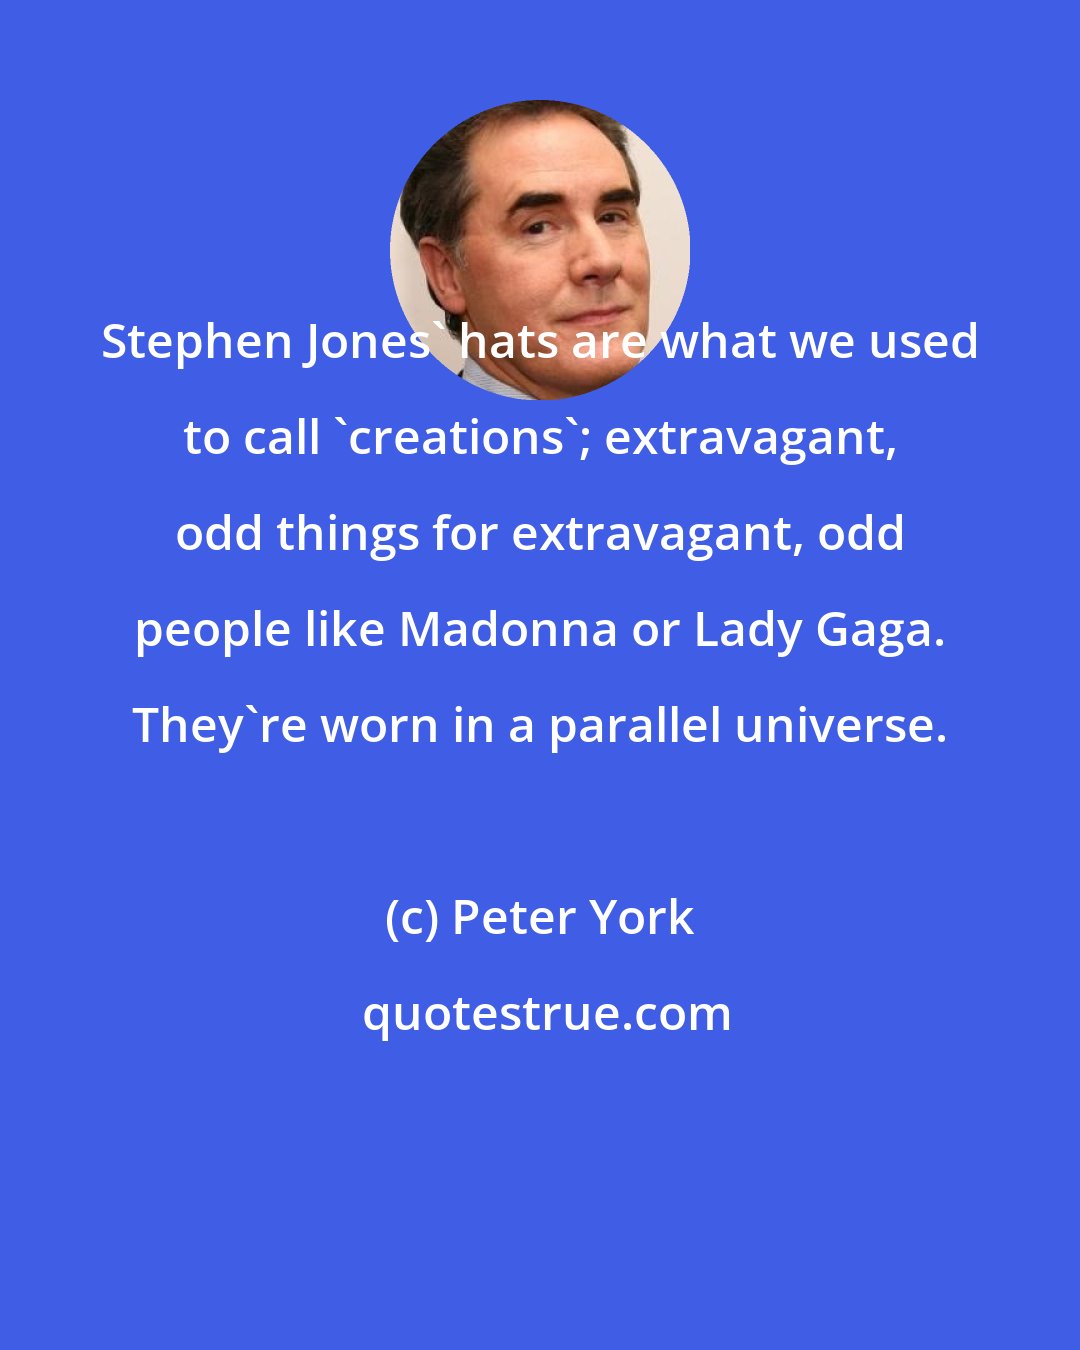 Peter York: Stephen Jones' hats are what we used to call 'creations'; extravagant, odd things for extravagant, odd people like Madonna or Lady Gaga. They're worn in a parallel universe.